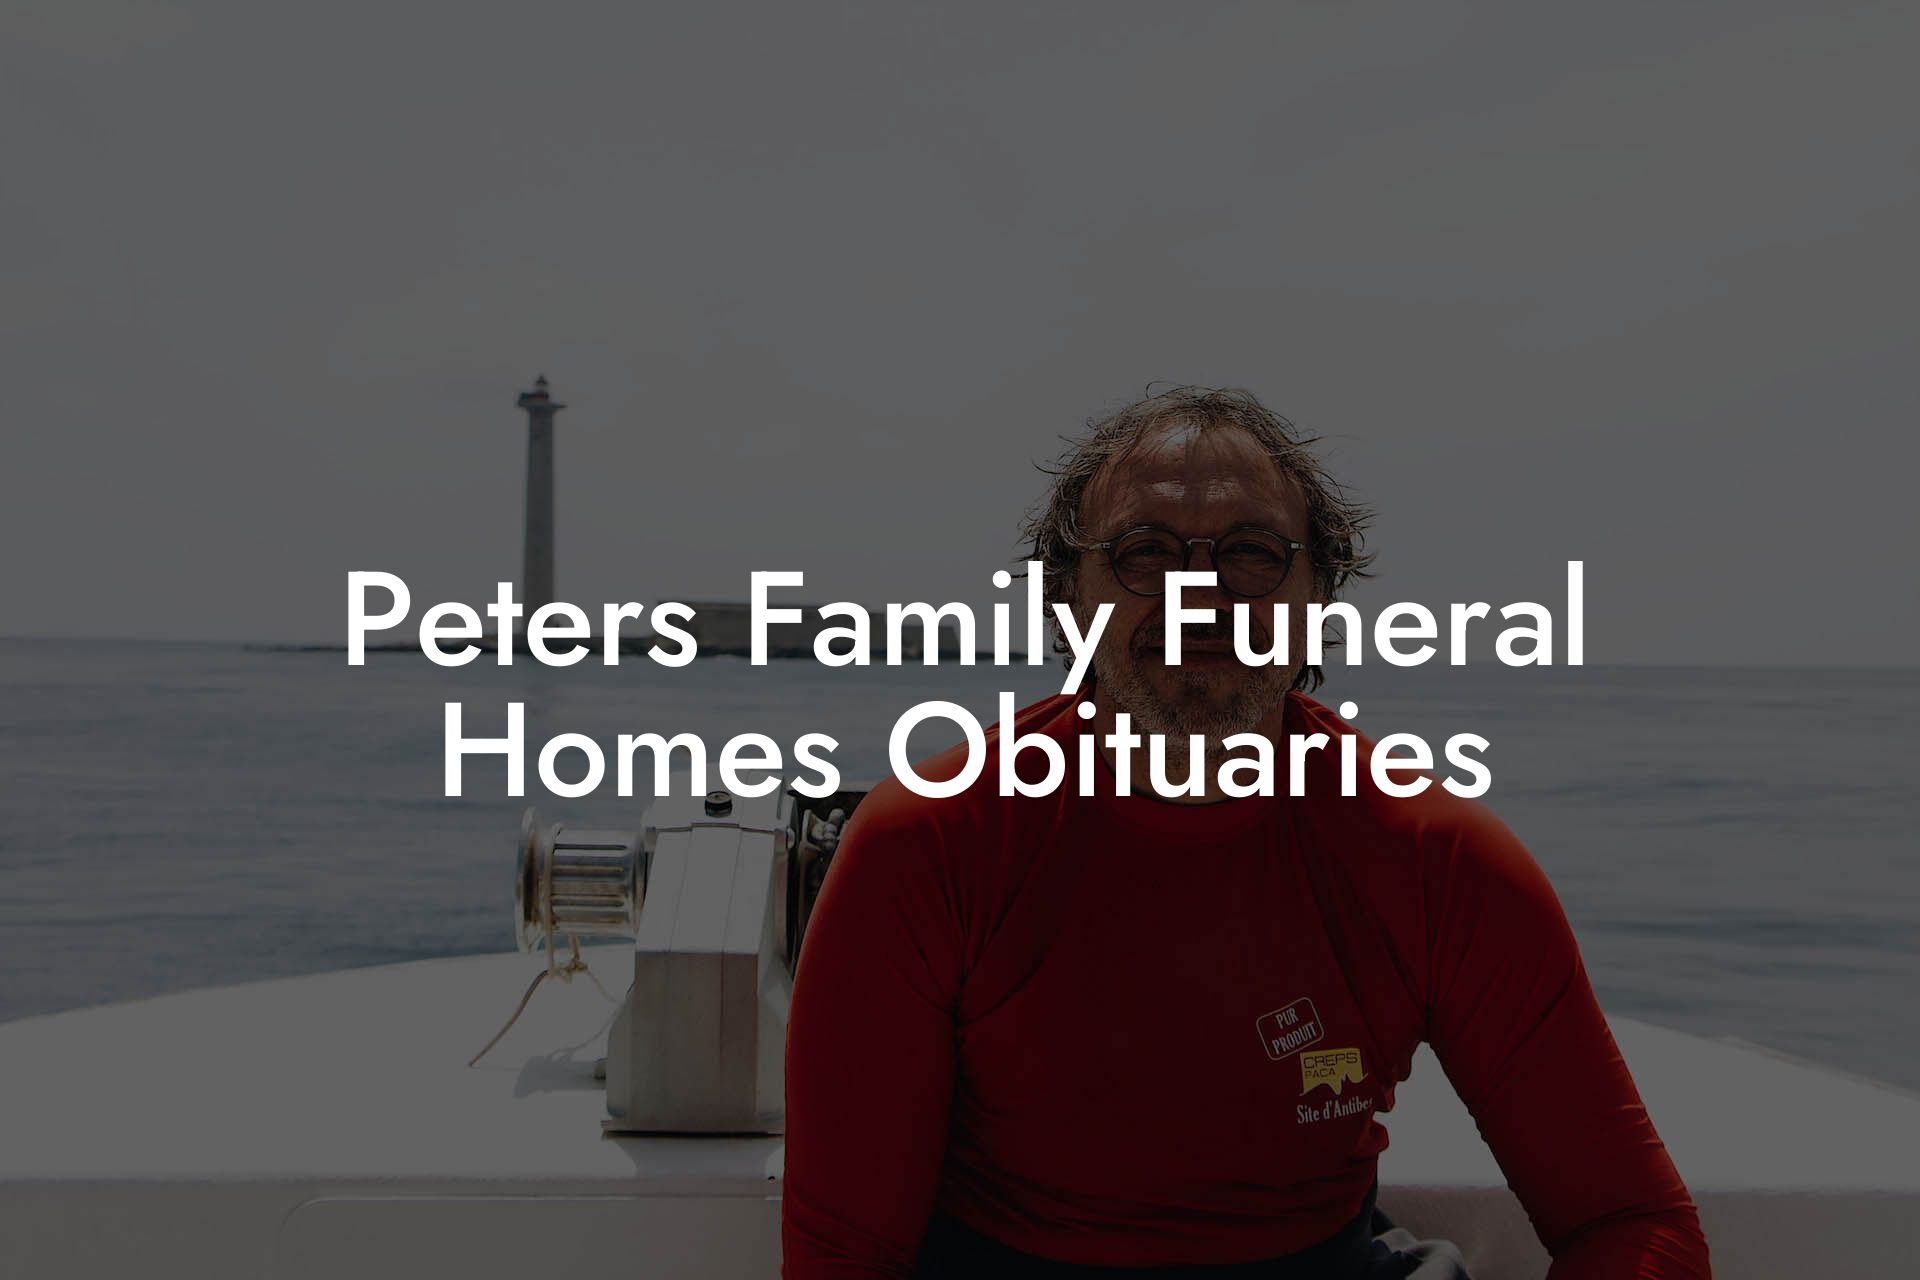 Peters Family Funeral Homes Obituaries